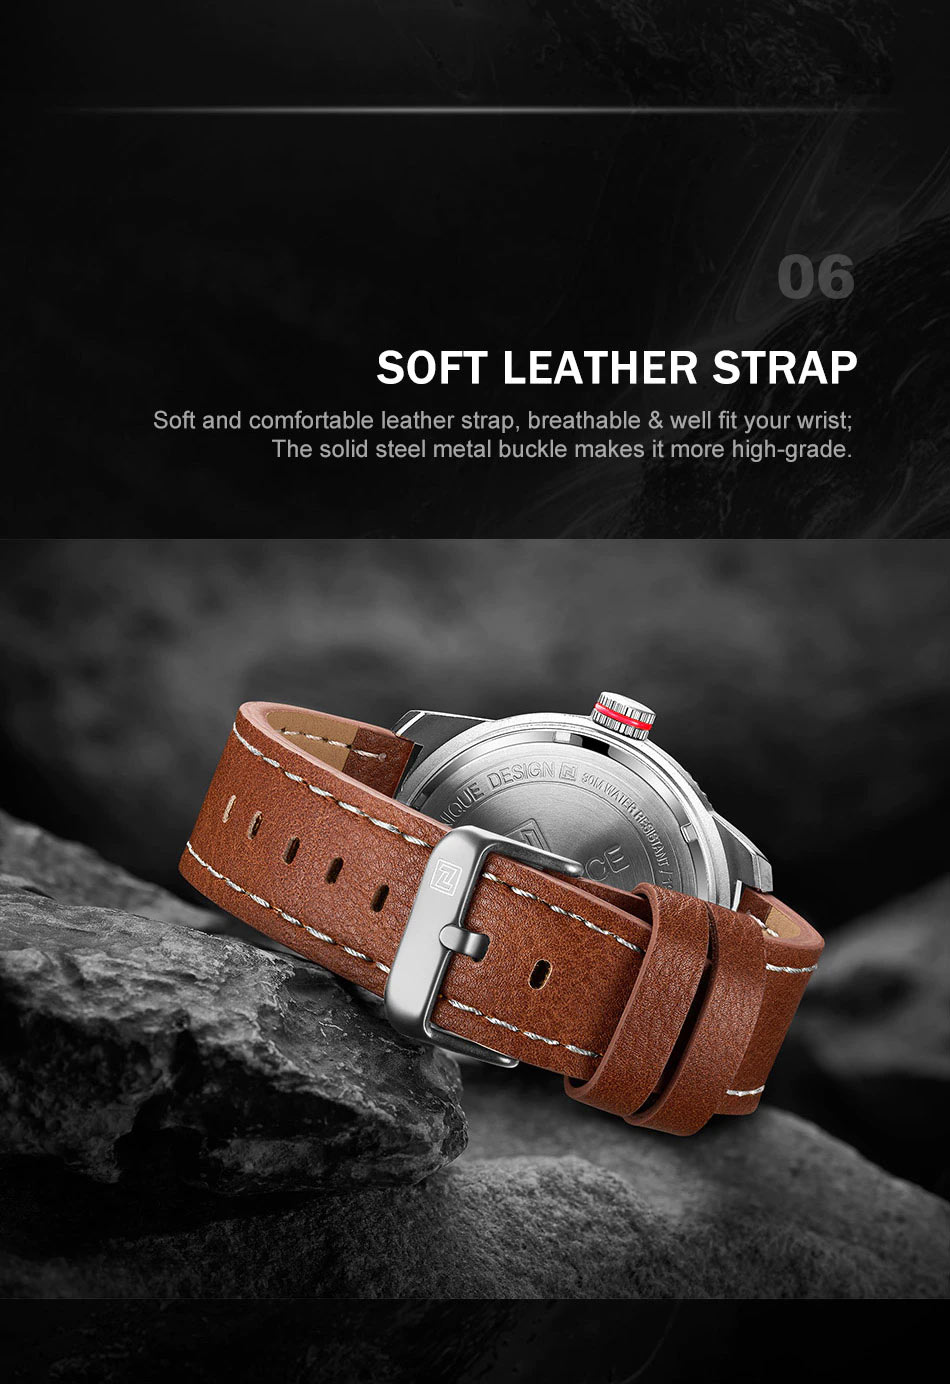 NaviForce-NF9063 soft and comfortable leather strap men's dress watch